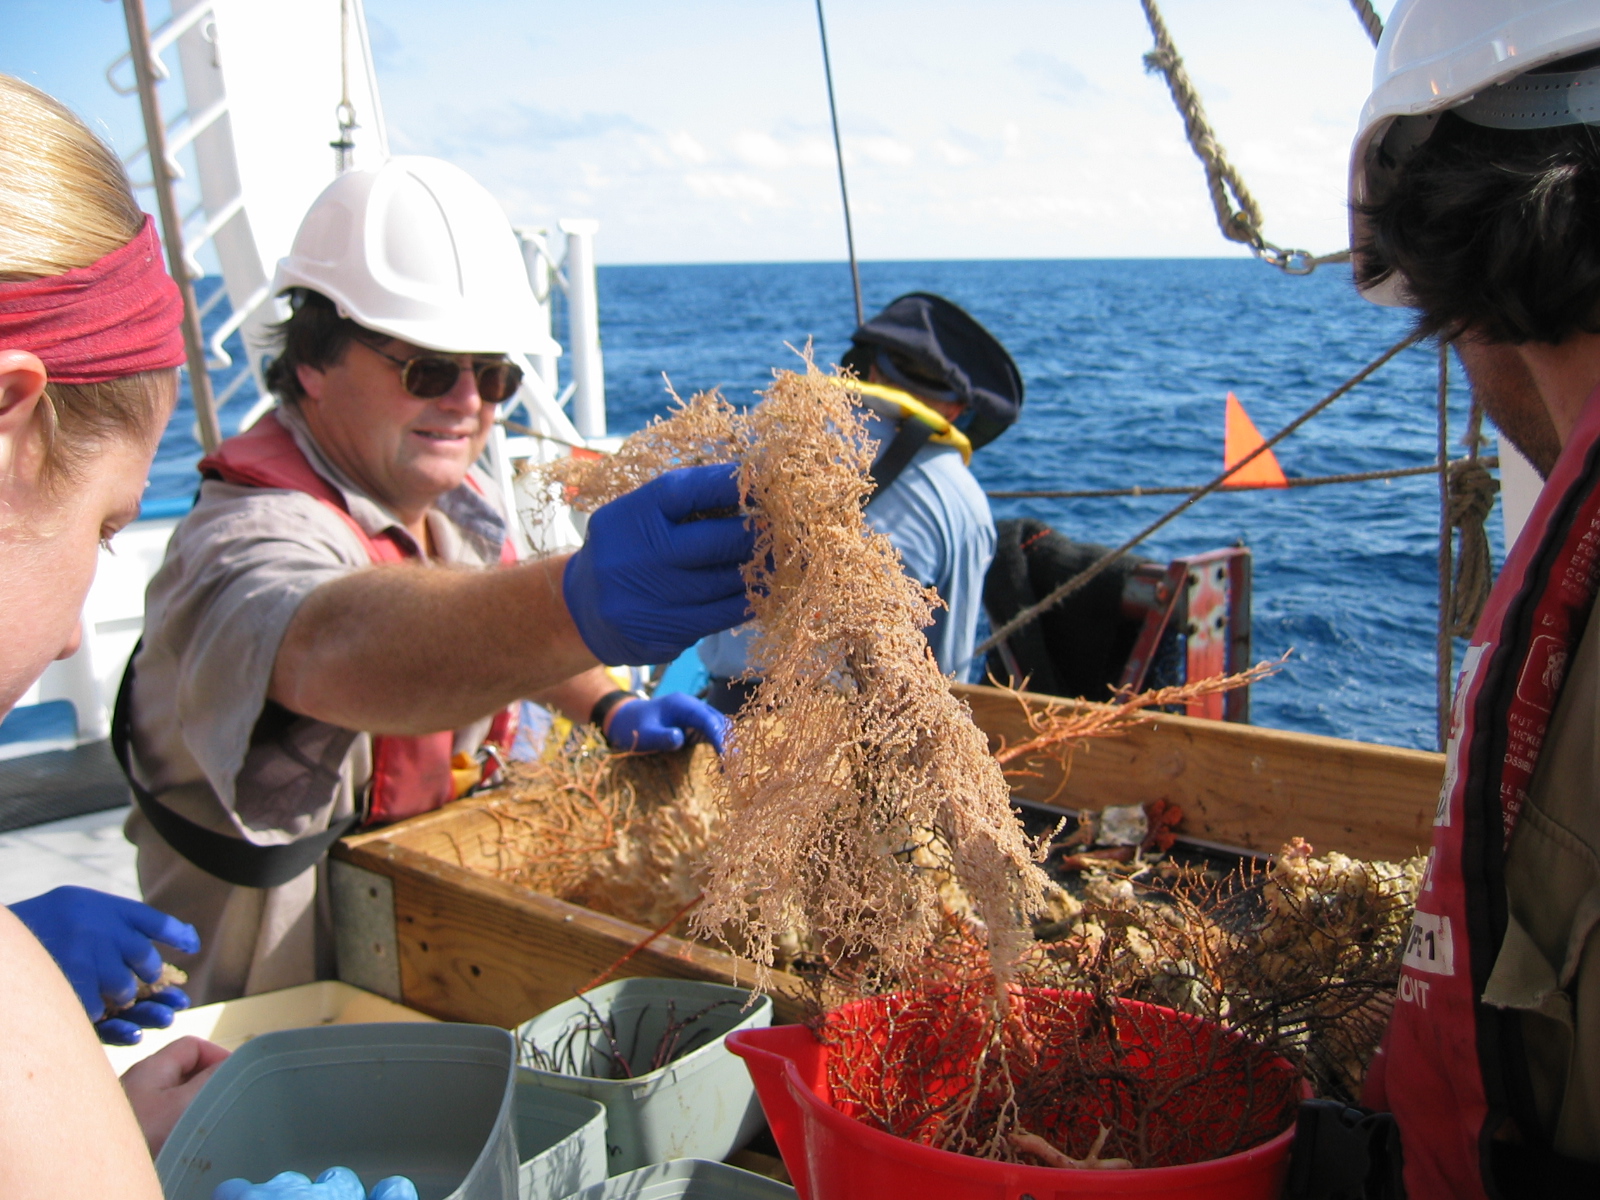 Researchers sort and identify animals on a boat